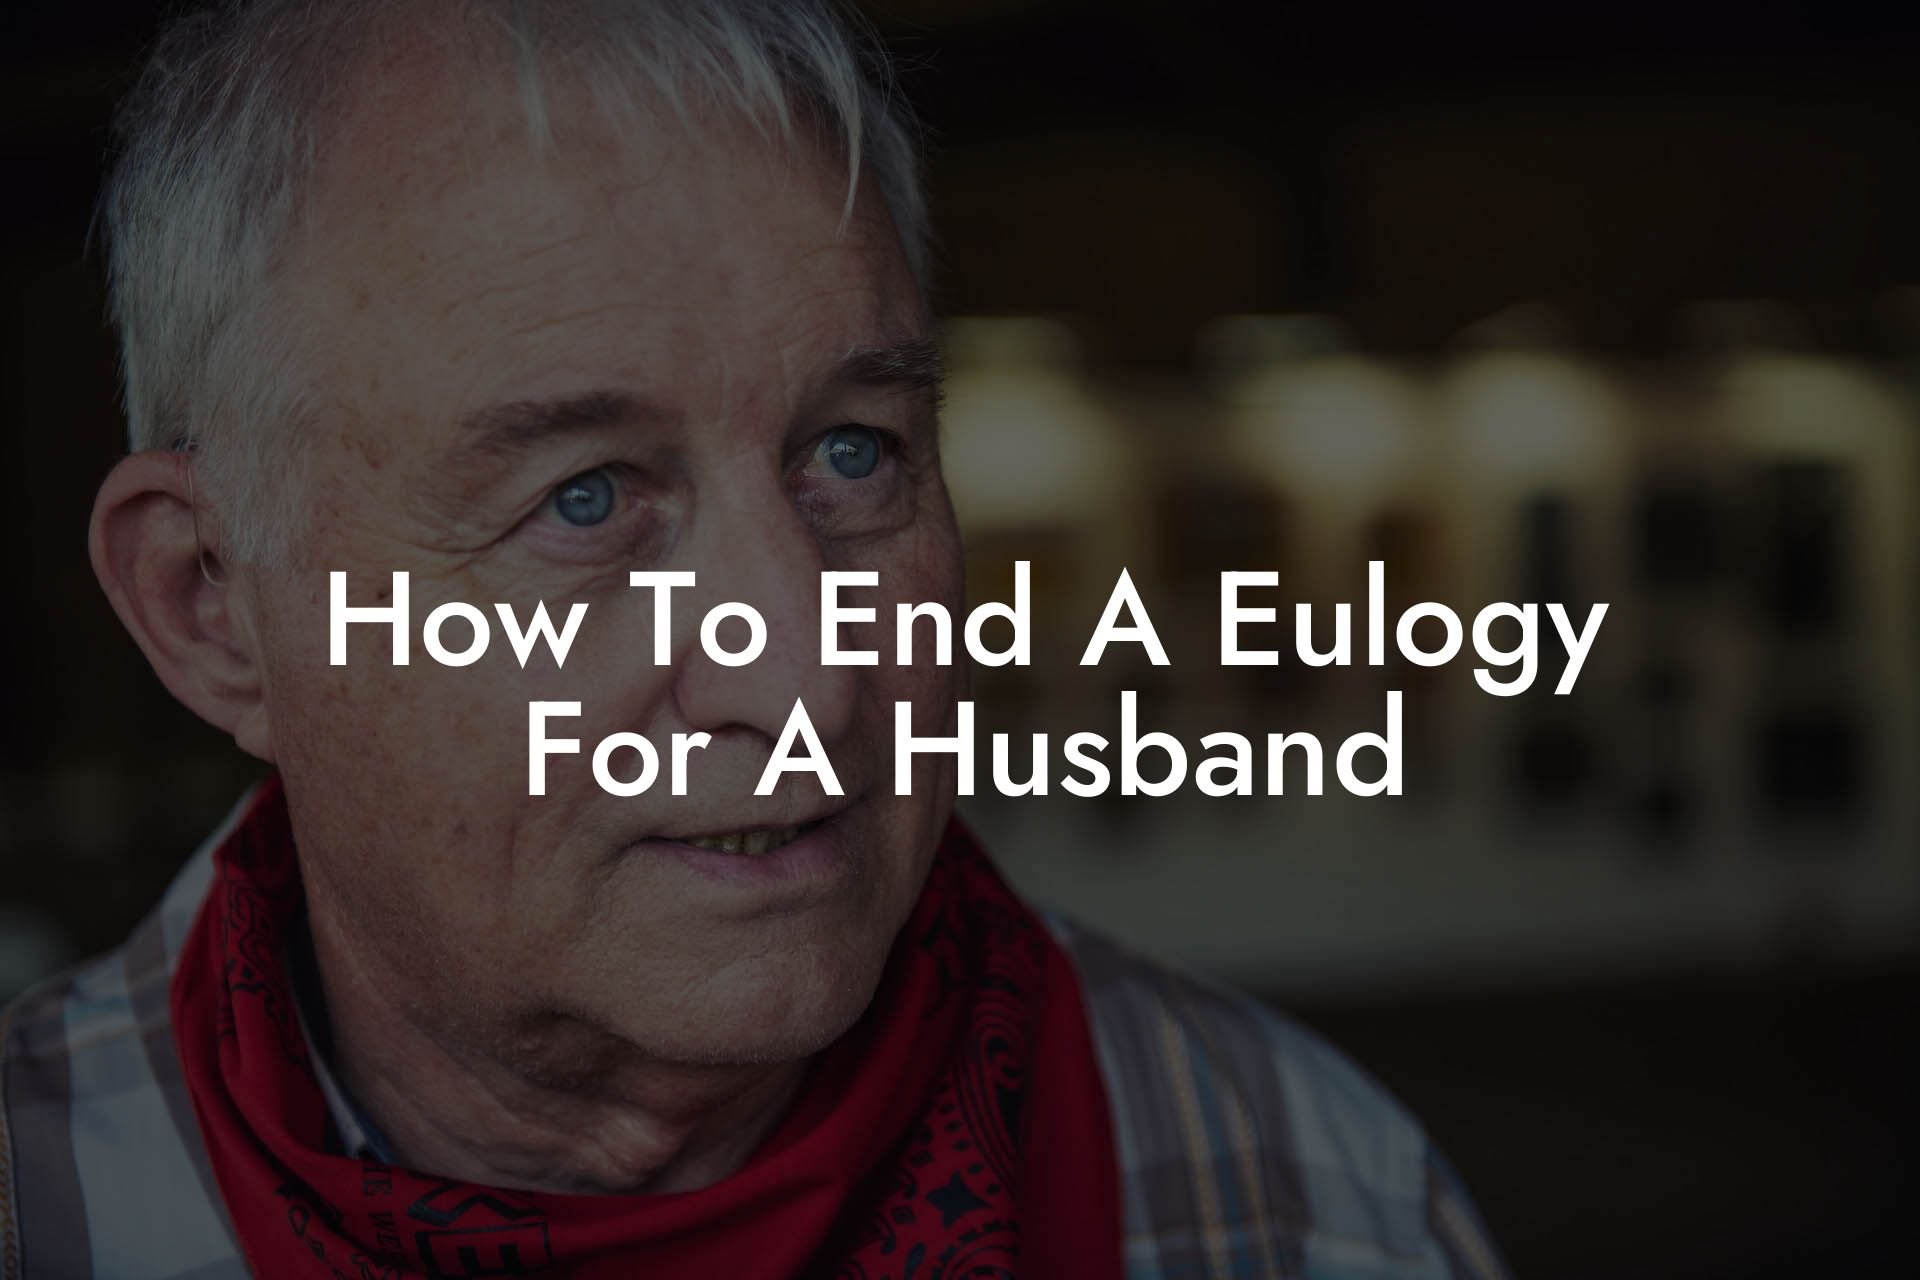 How To End A Eulogy For A Husband